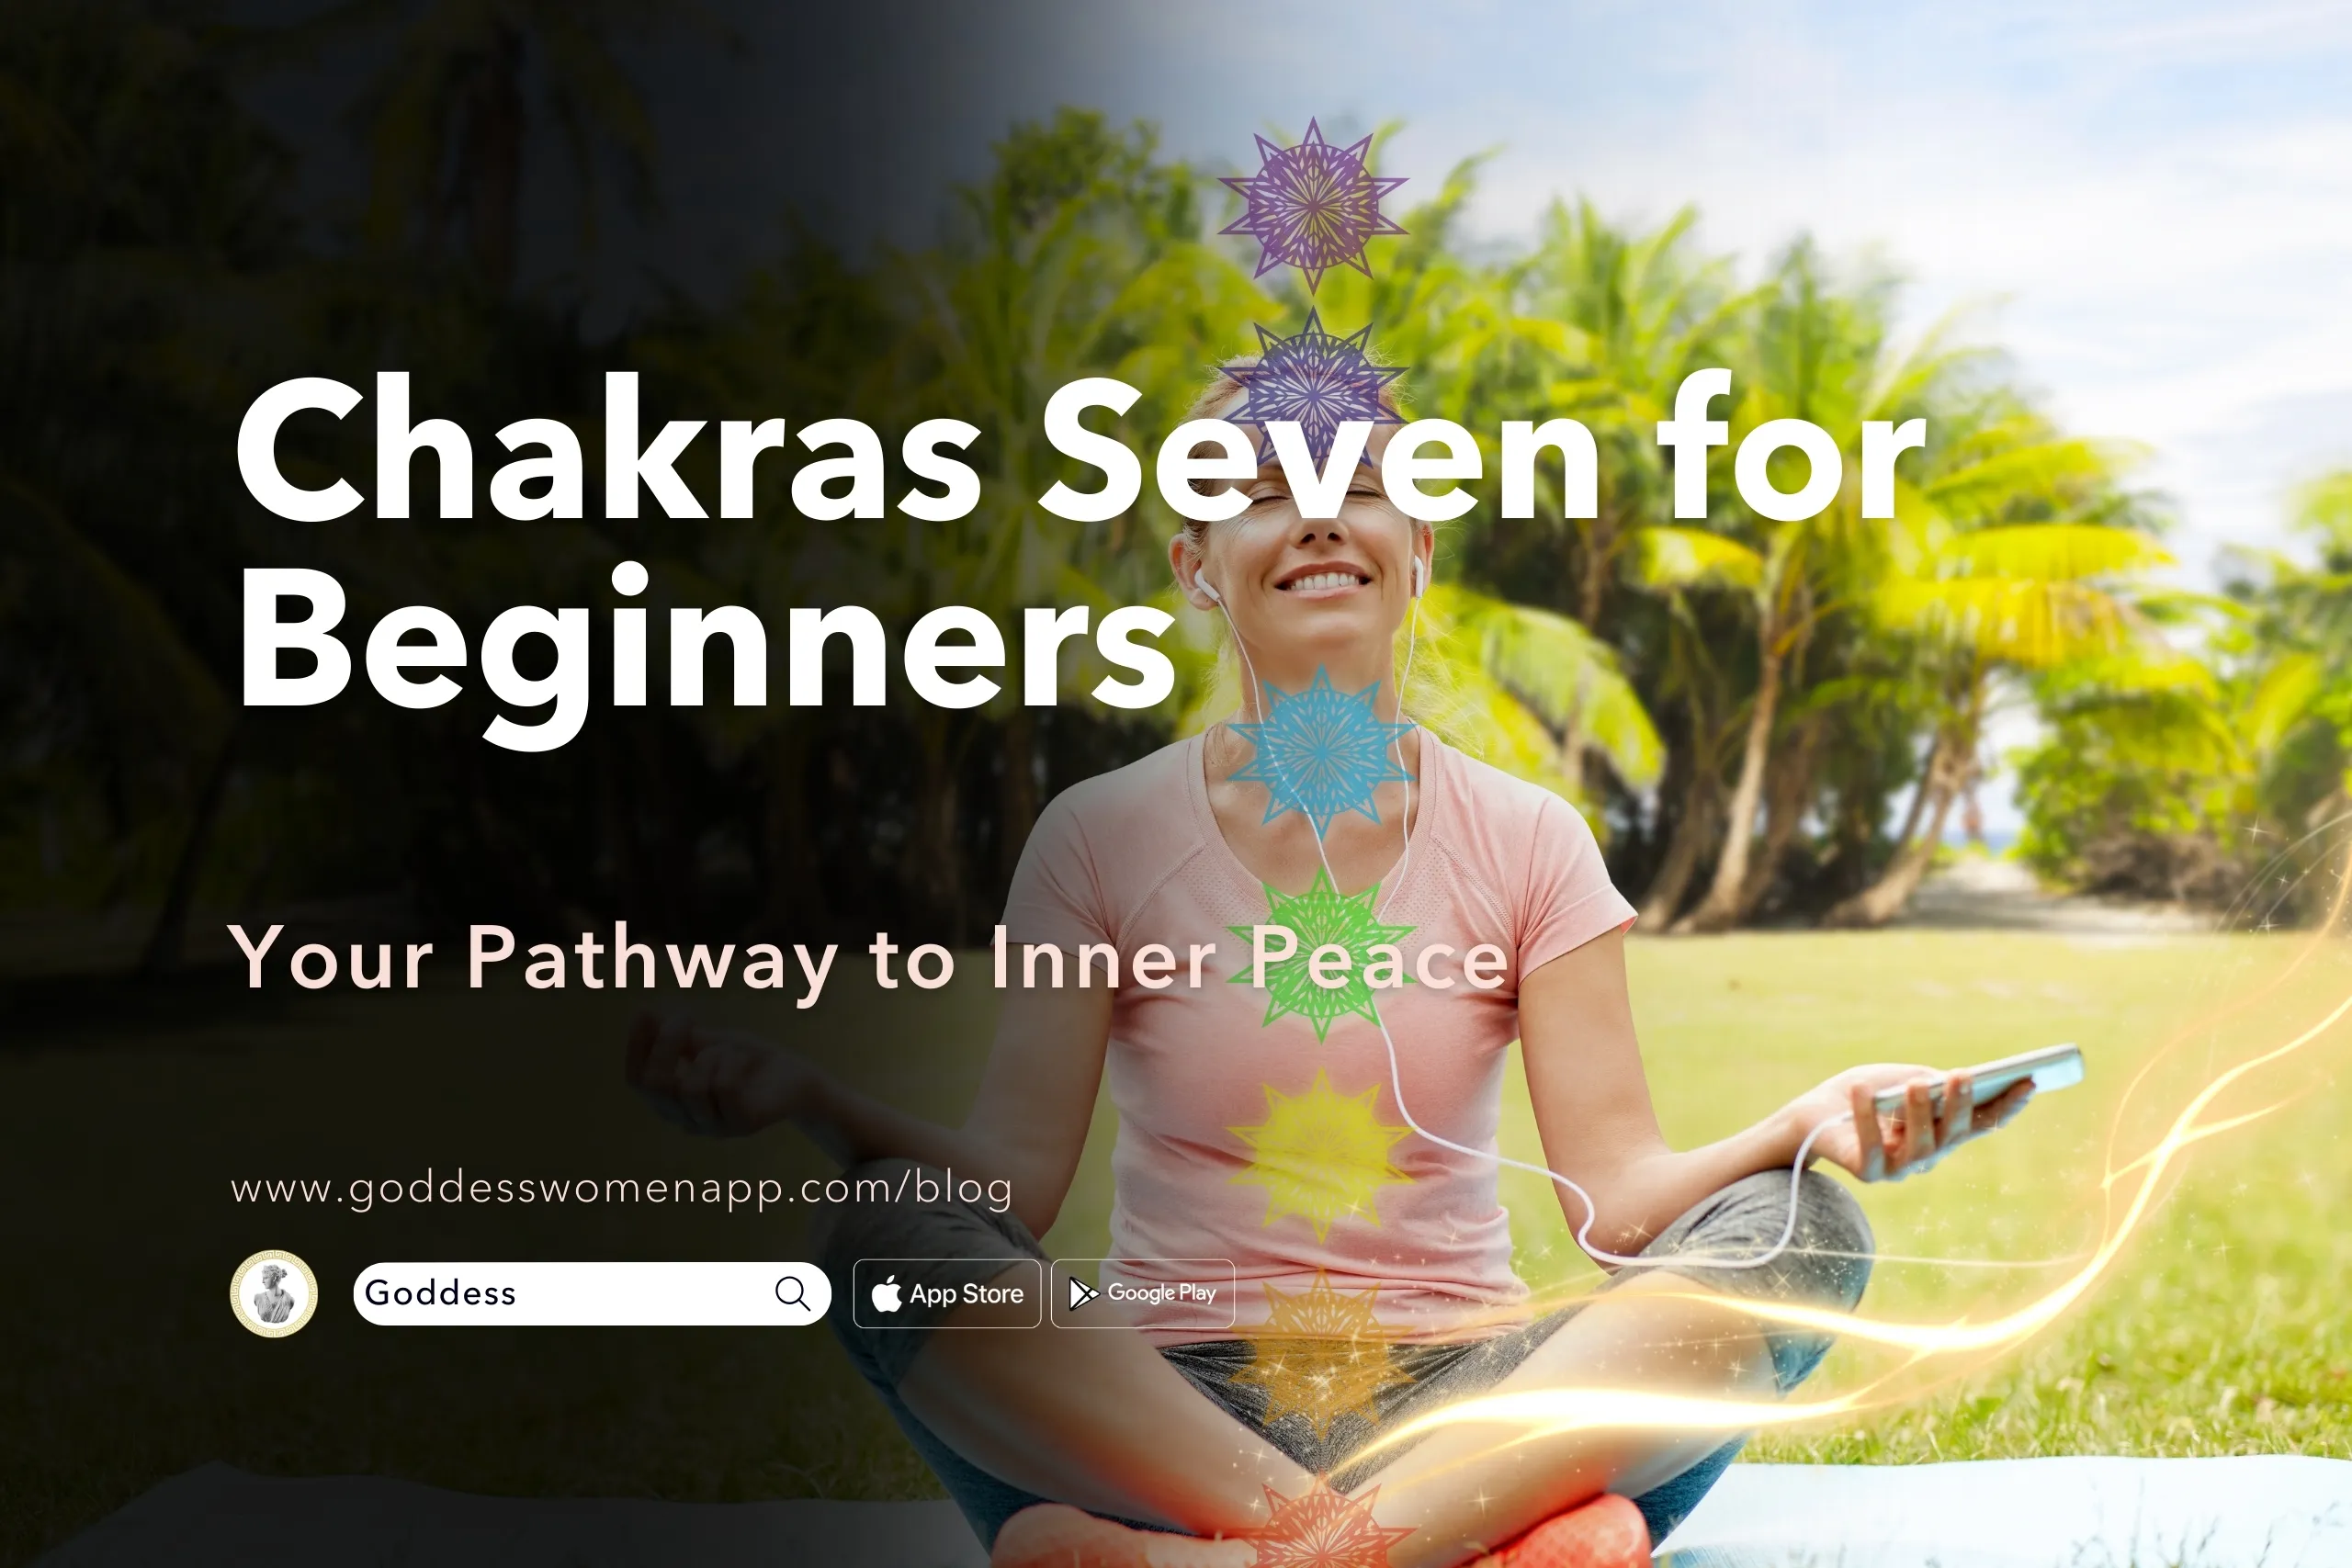 Chakras Seven for Beginners: Your Pathway to Inner Peace